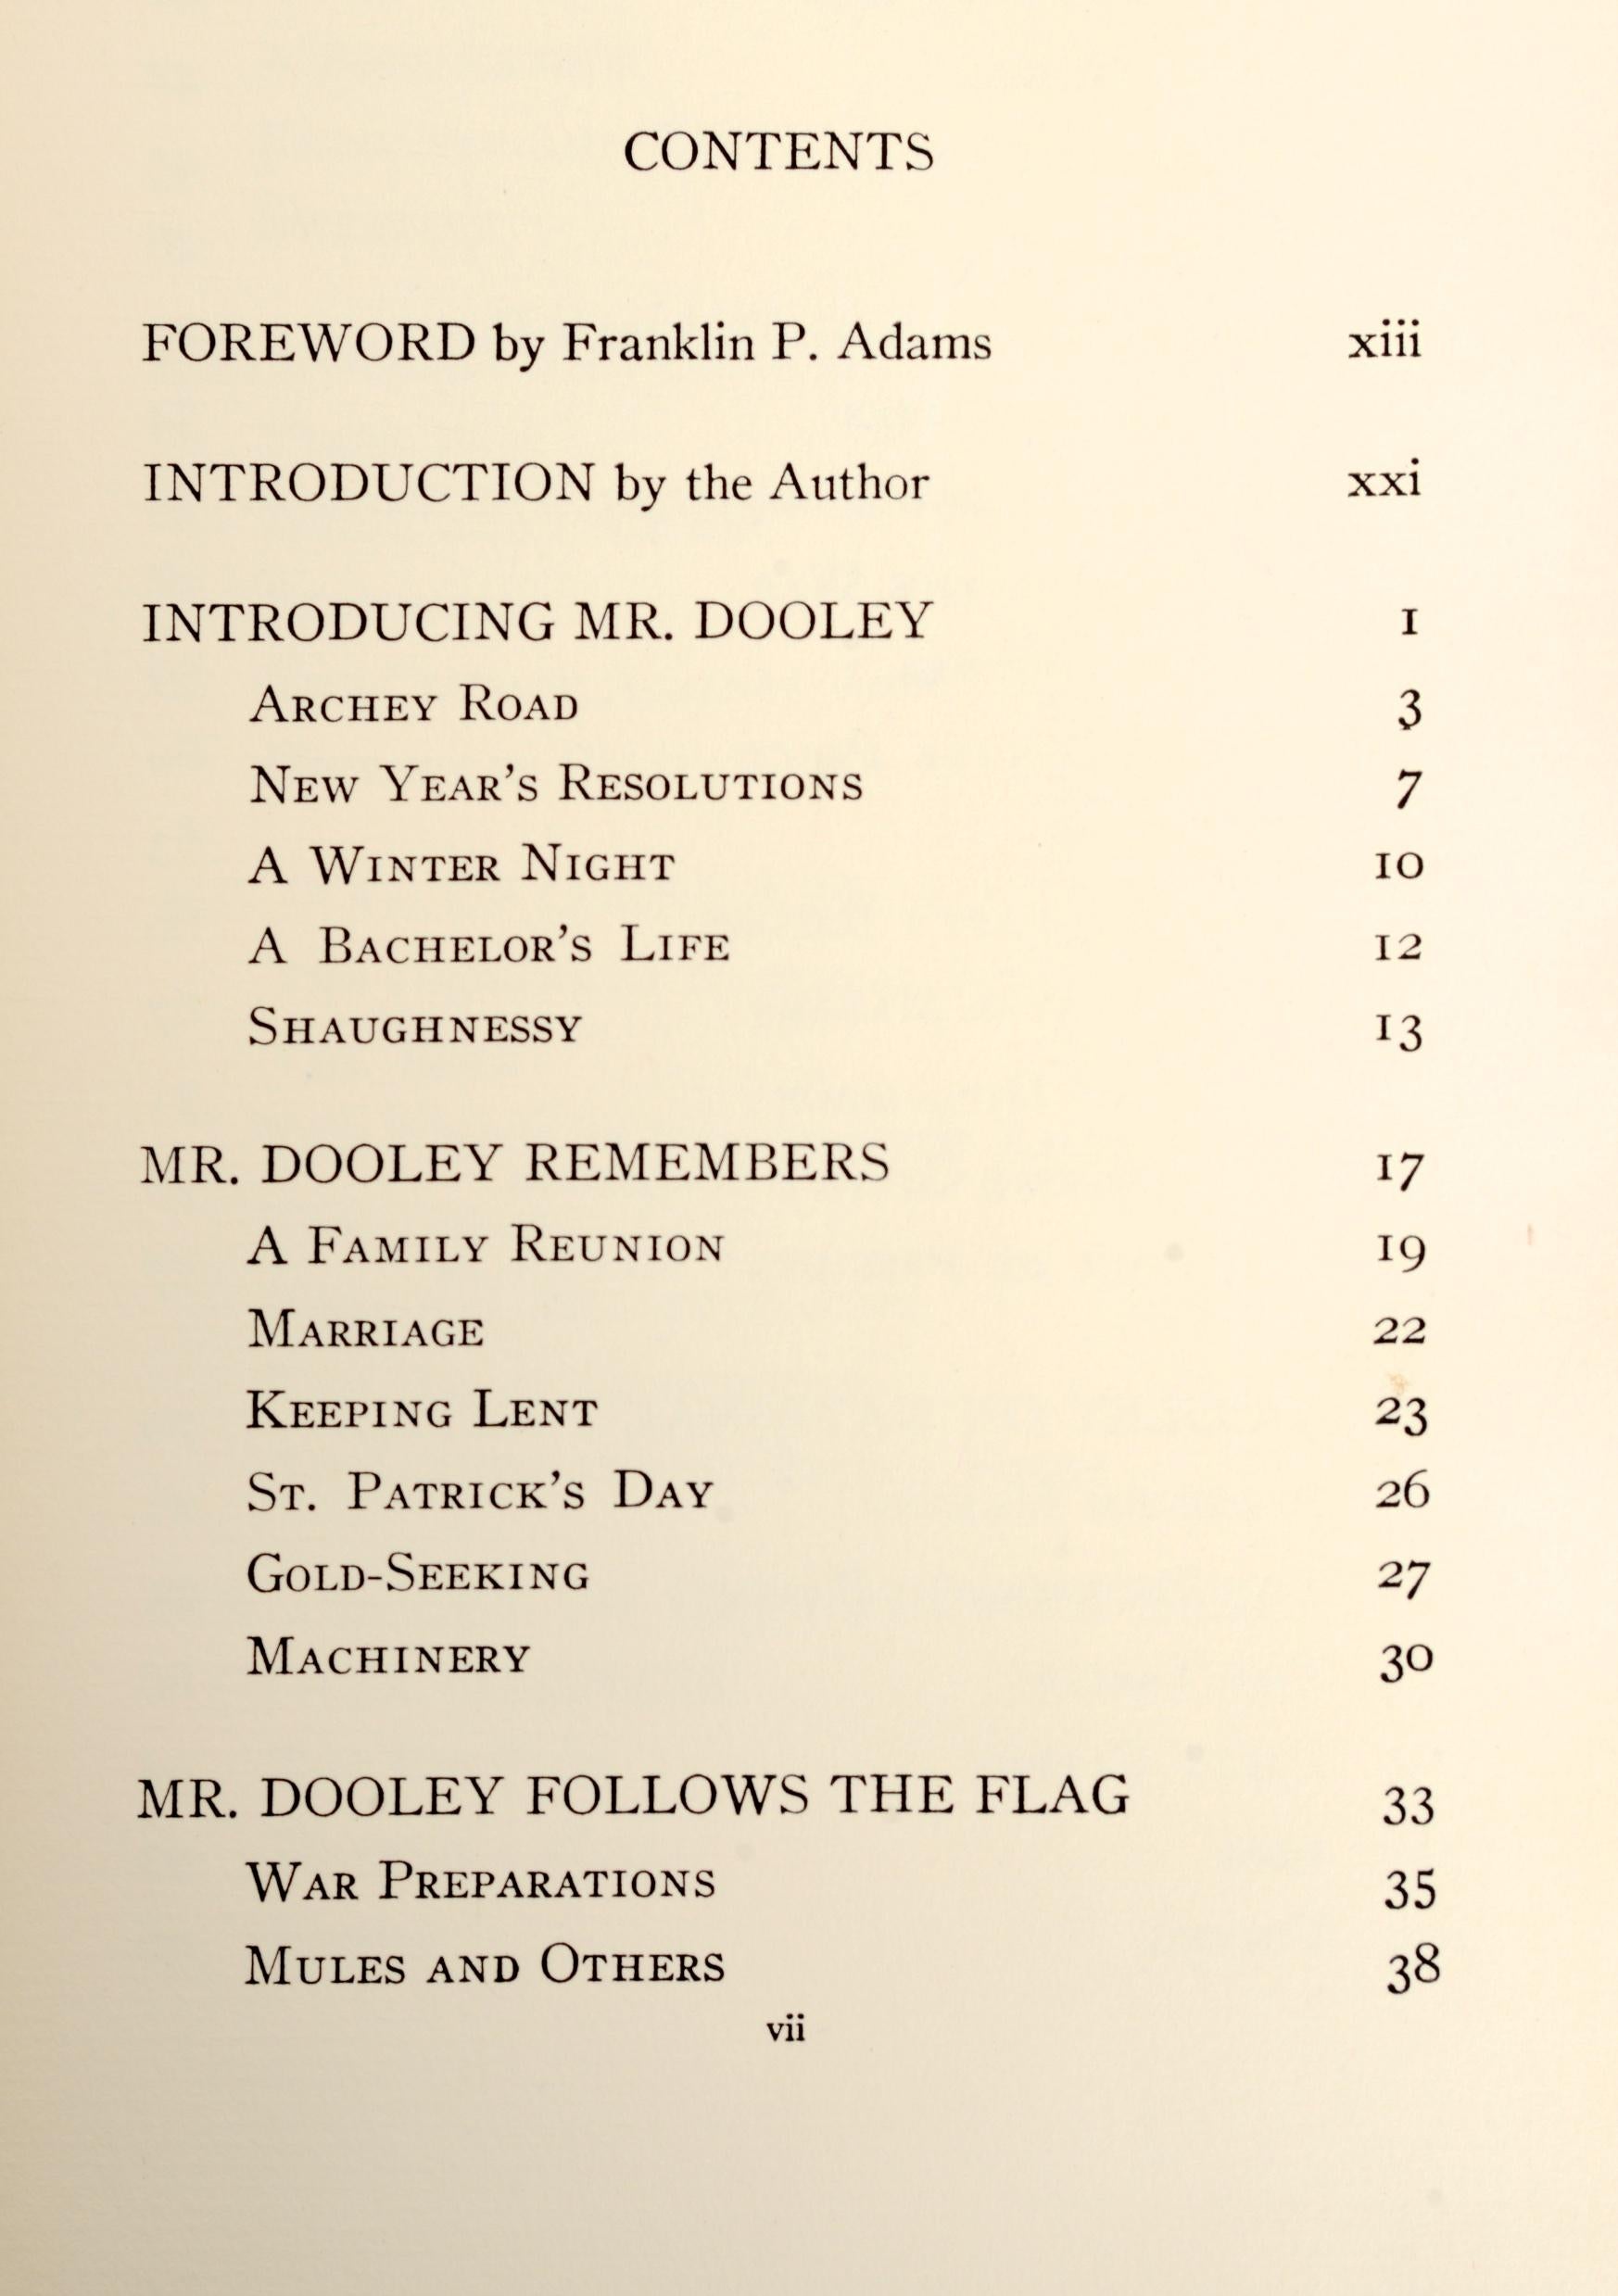 Mr. Dooley at His Best, by Finley Peter Dunne Edited by Elmer Ellis For Sale 2